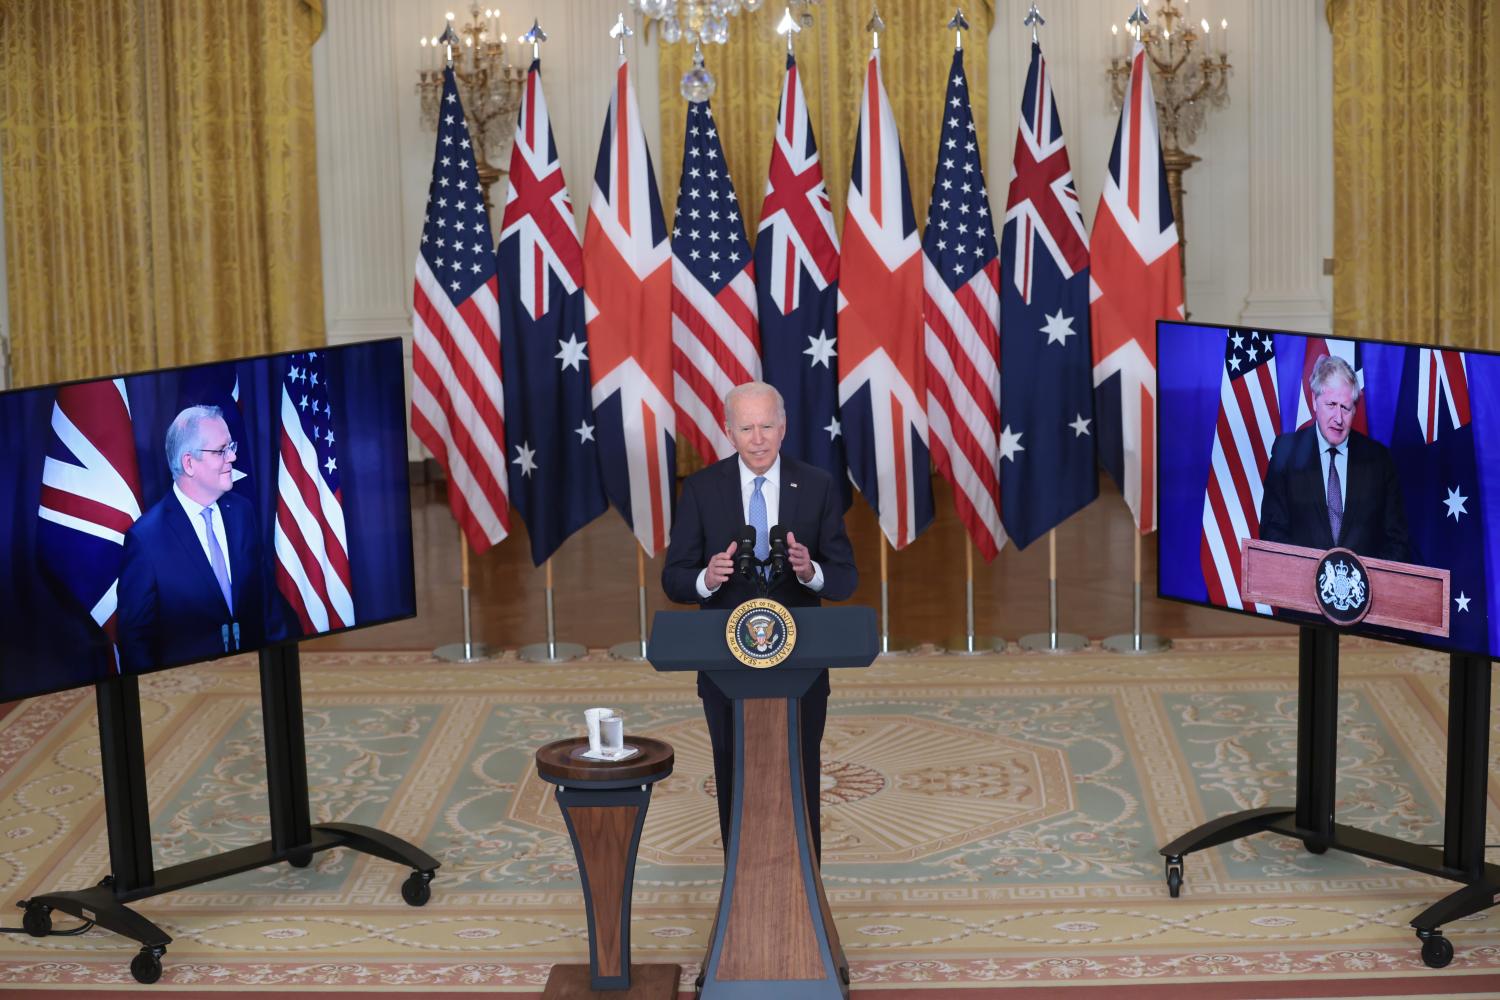 U.S. President Joe Biden delivers remarks about a national security initiative on September 15, 2021 in the East Room of the White House in Washington, DC. President Biden is joined virtually by Prime Minister Scott Morrison of Australia and Prime Minister Boris Johnson of the United Kingdom.Featuring: President Joe Biden, Prime Minister Boris Johnson, Prime Minister Scott MorrisonWhere: Washington, District Of Columbia, United StatesWhen: 15 Sep 2021Credit: POOL via CNP/INSTARimages/Cover Images